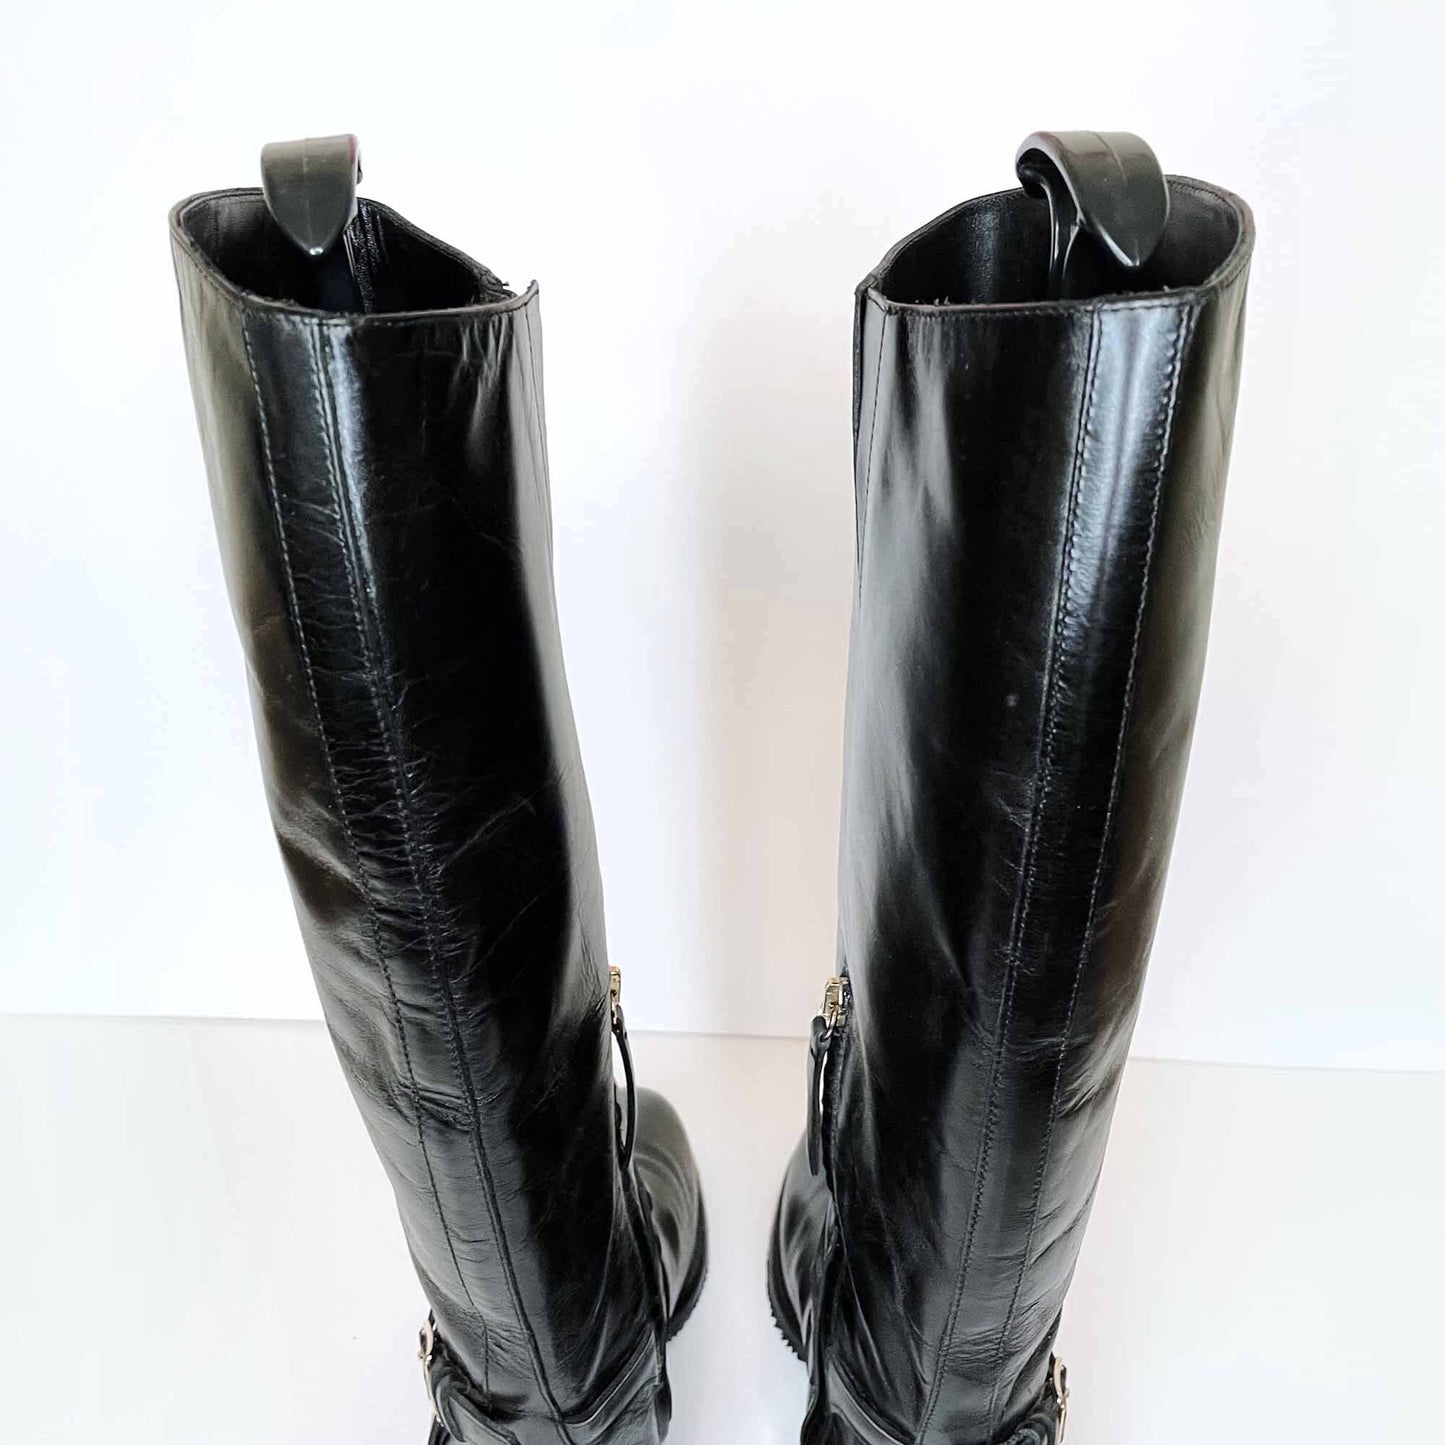 burberry black adelaide equestrian bridle tall riding boots - size 39